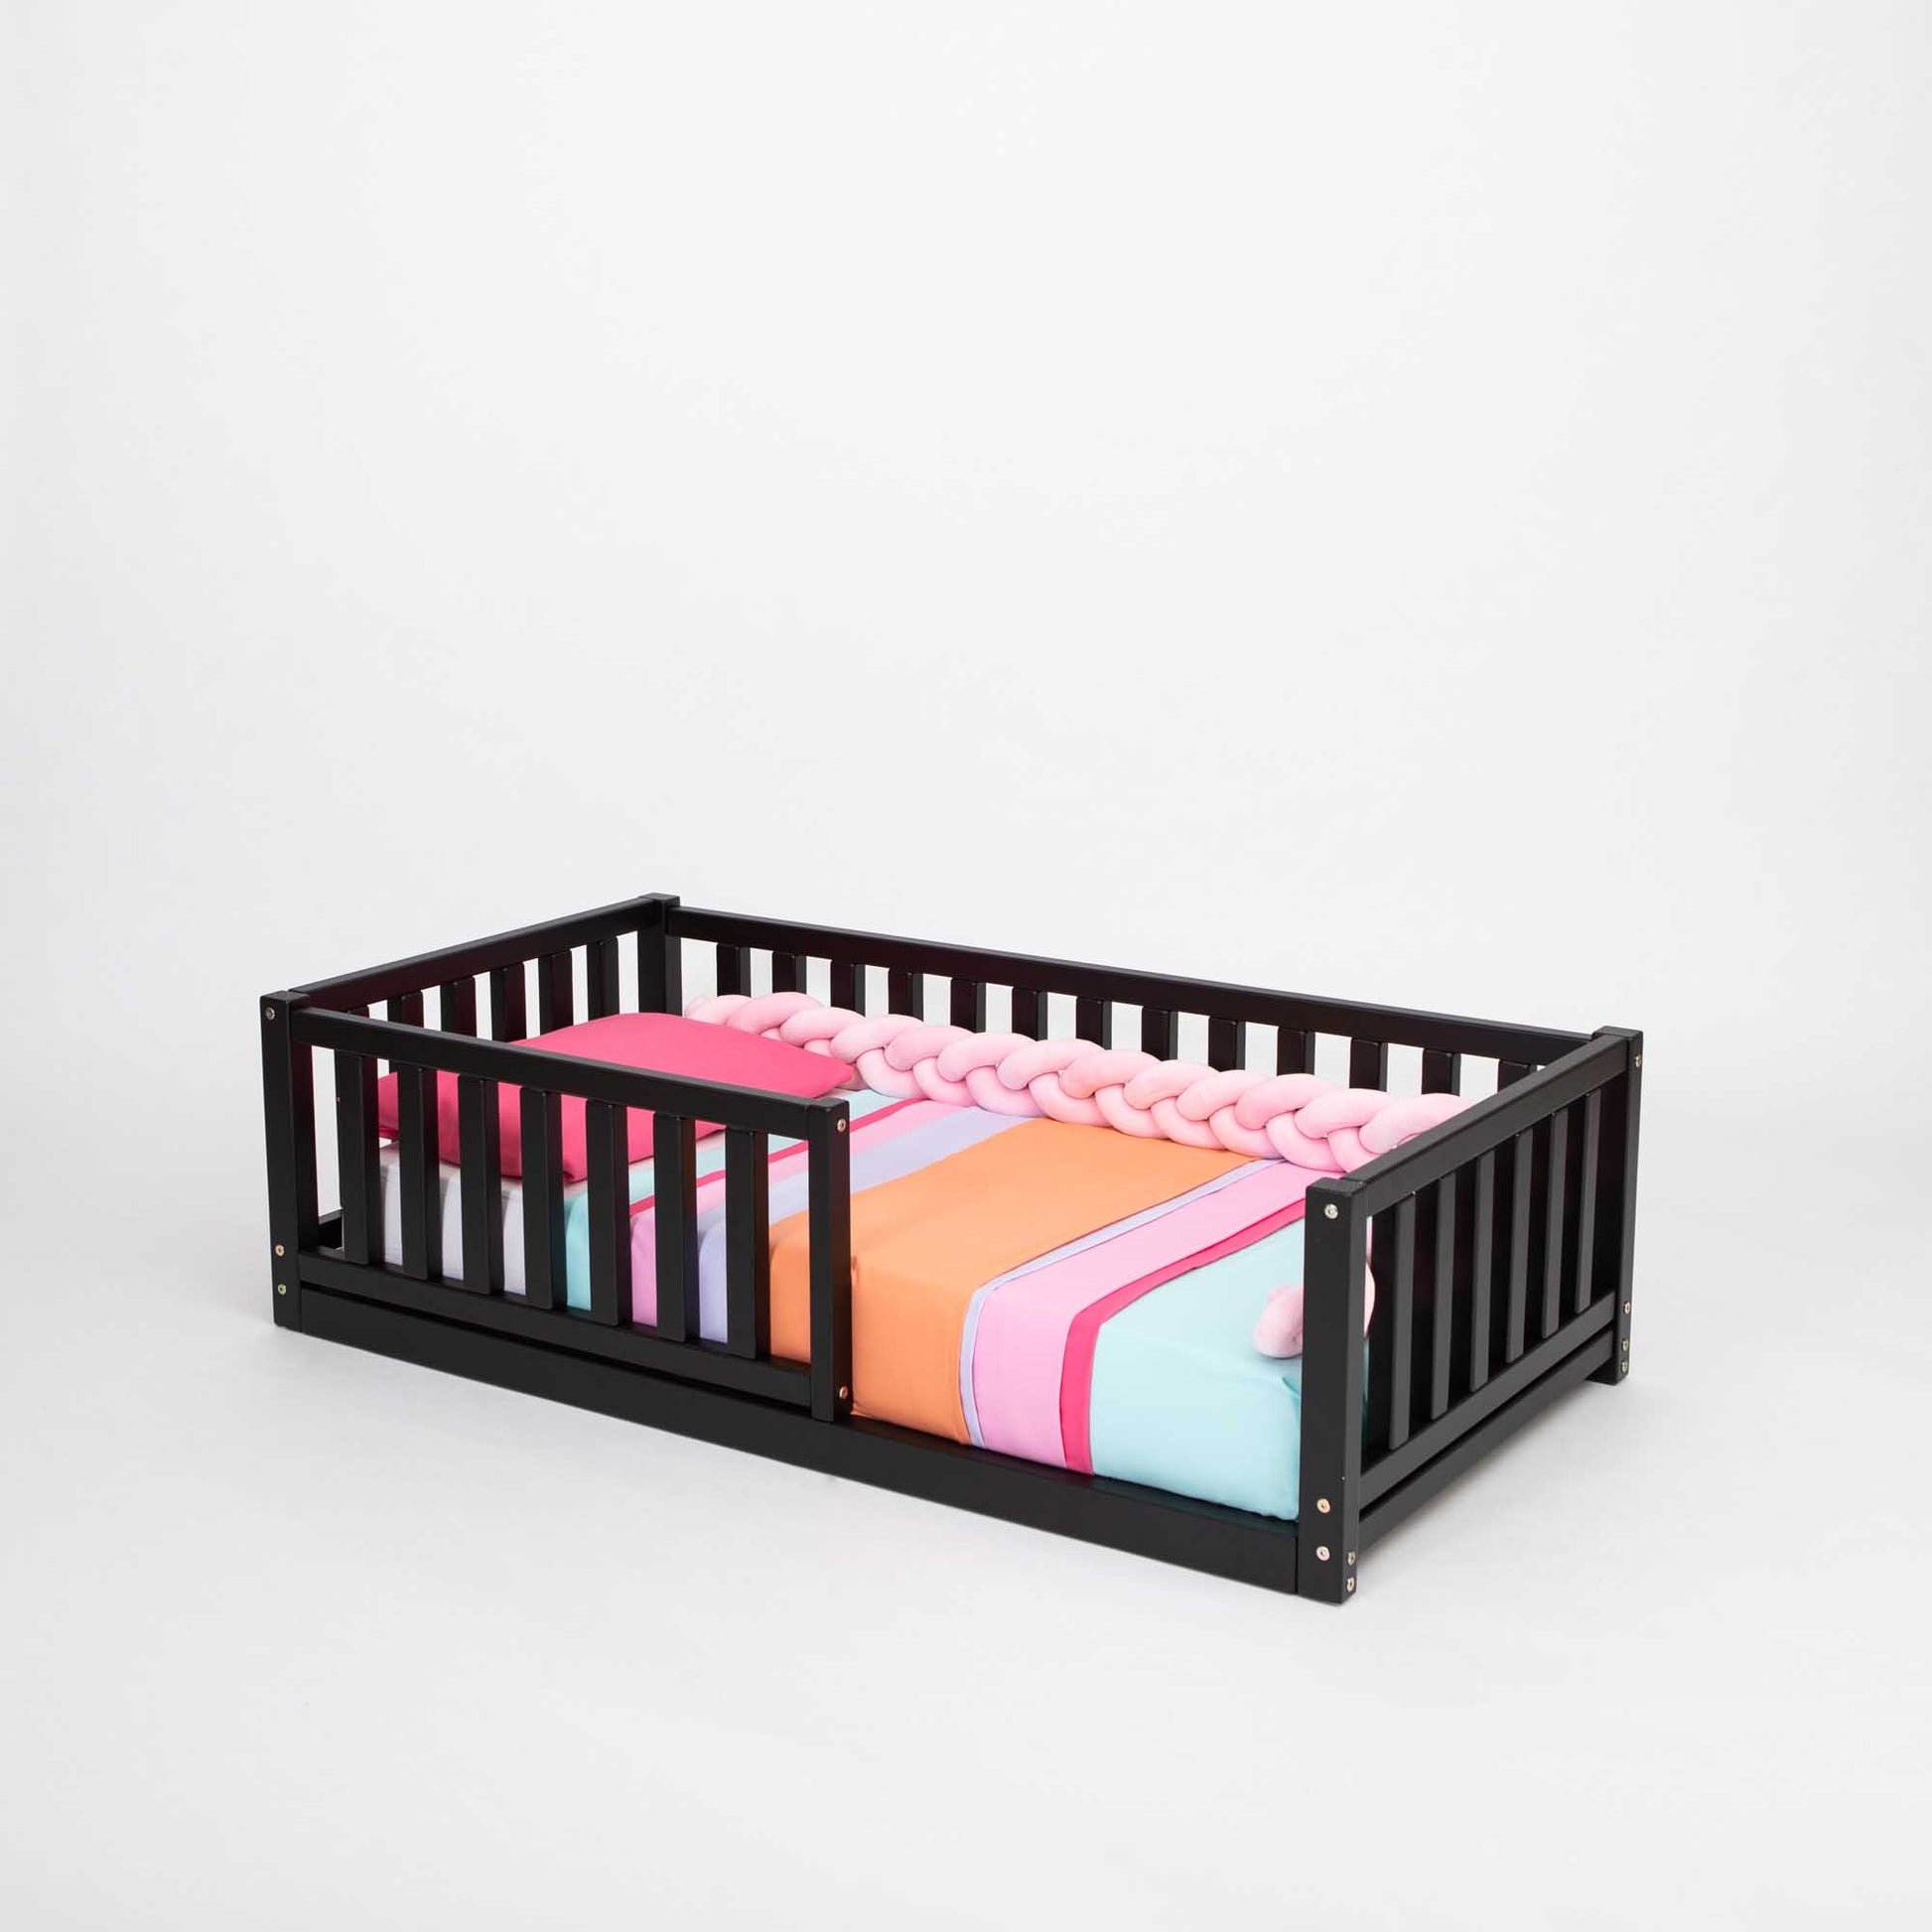 A long-lasting Sweet Home From Wood 2-in-1 toddler bed on legs with a vertical rail fence, made from solid pine, featuring a colorful blanket on top.